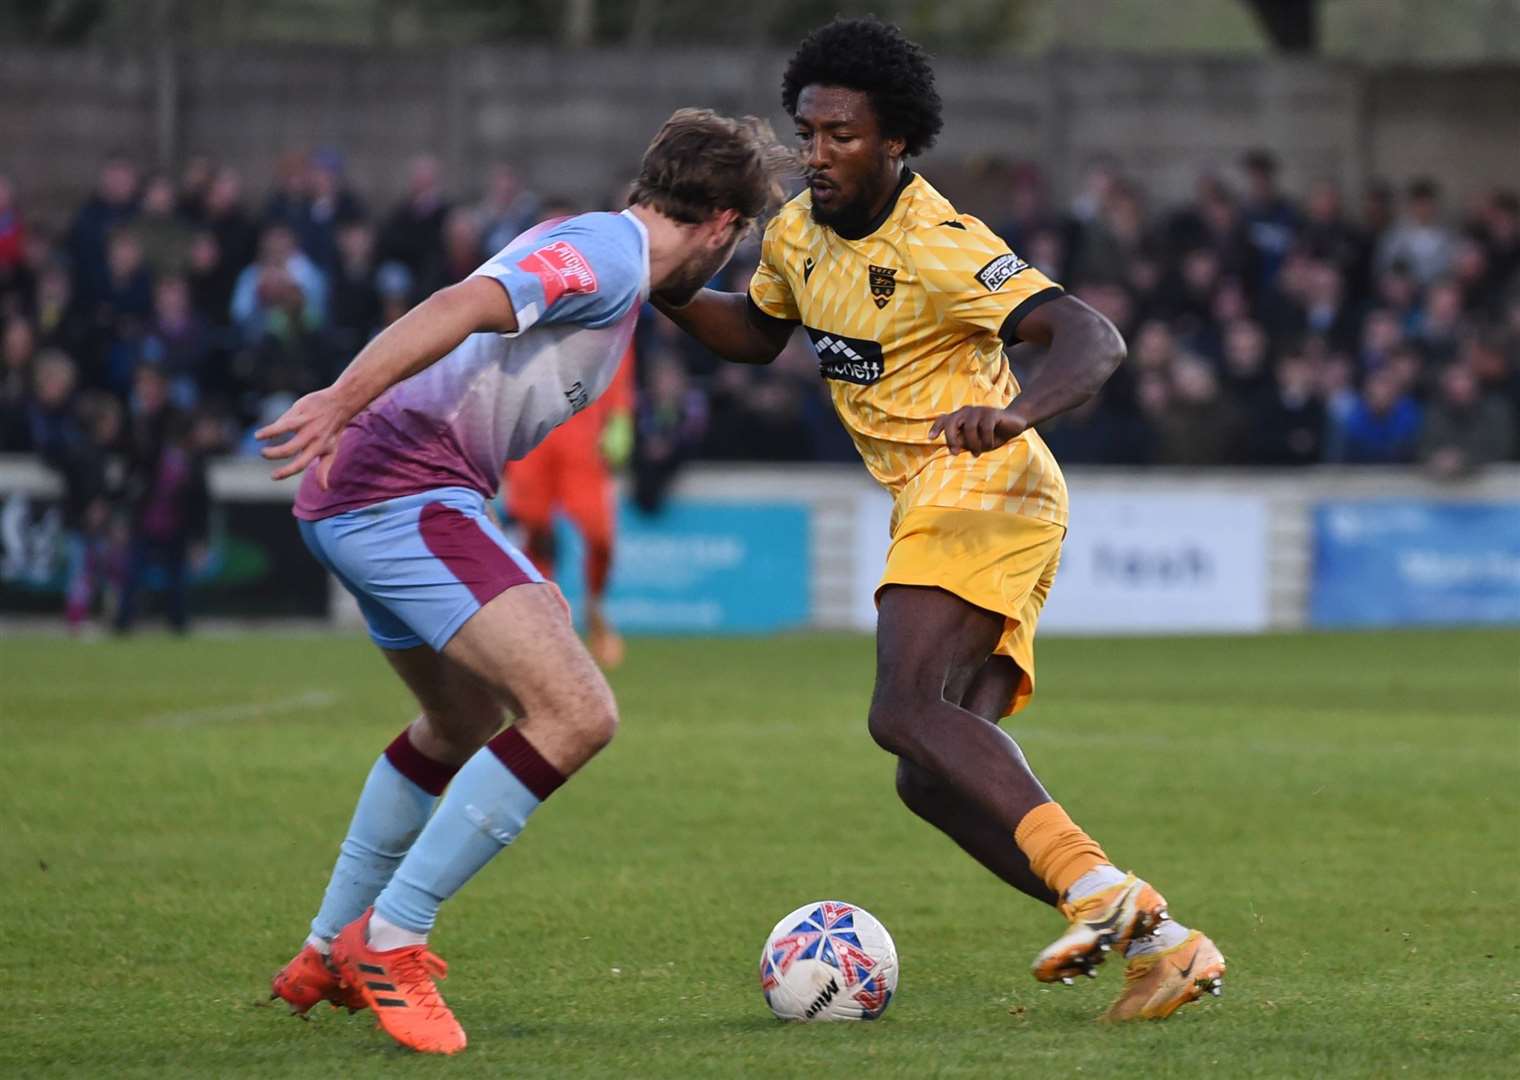 Maidstone’s Devonte Aransibia runs at the Chesham defence in their FA Cup tie. Picture: Steve Terrell